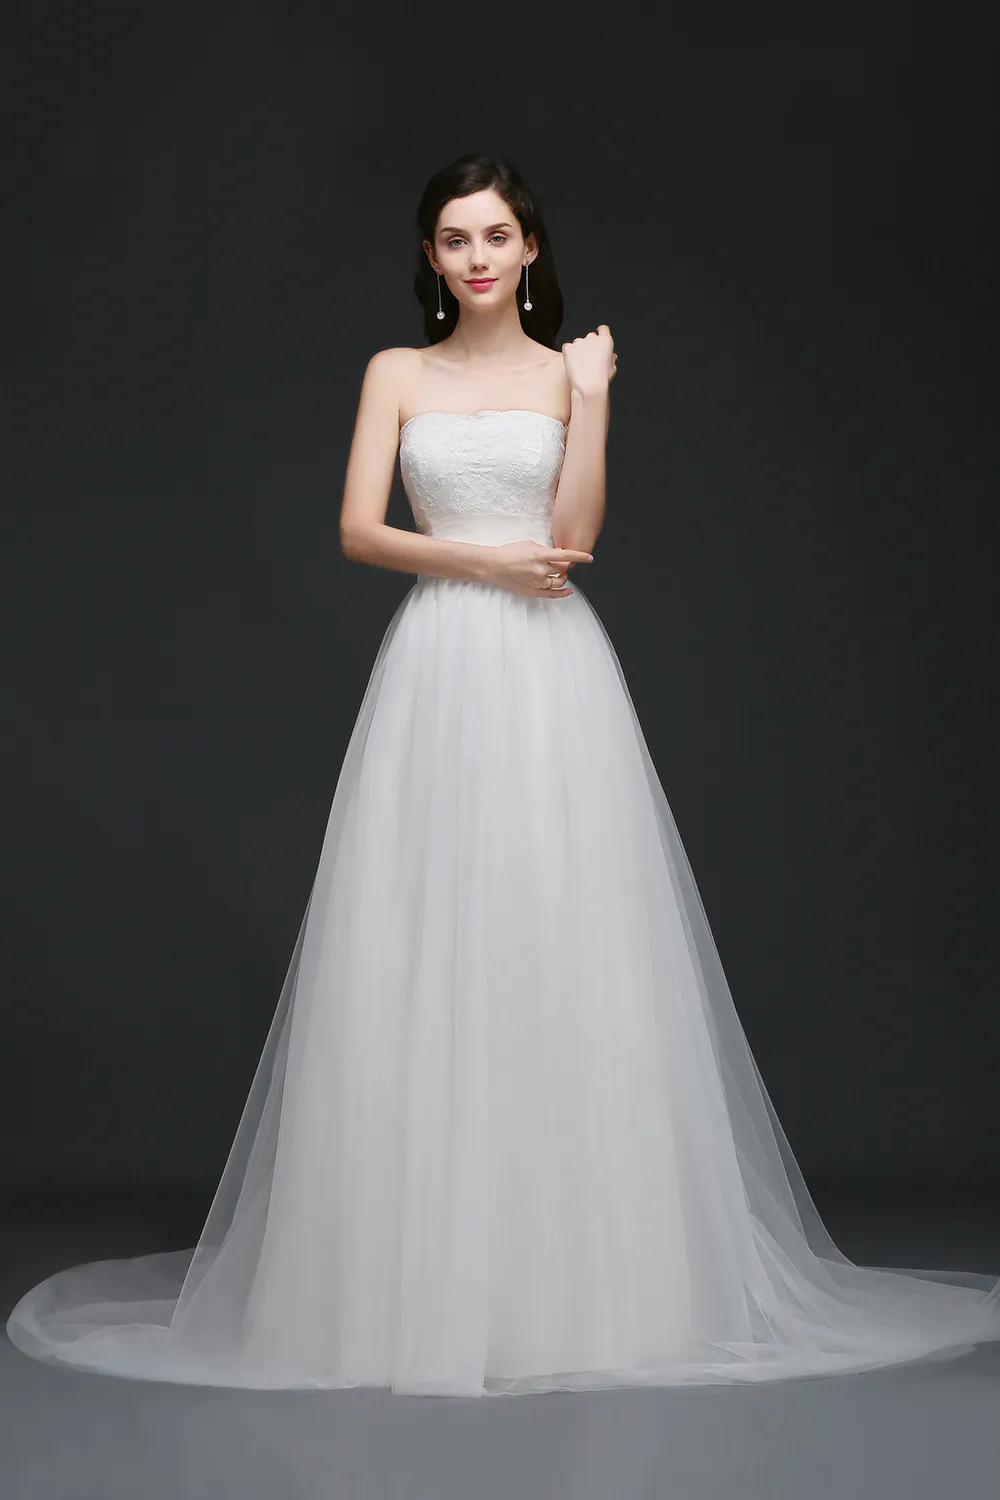 Sweet Strapless Garden Wedding Dresses Lace Top Soft Tulle Beach Wedding Gowns Summer Cheap Wedding Gowns Robe CPS762